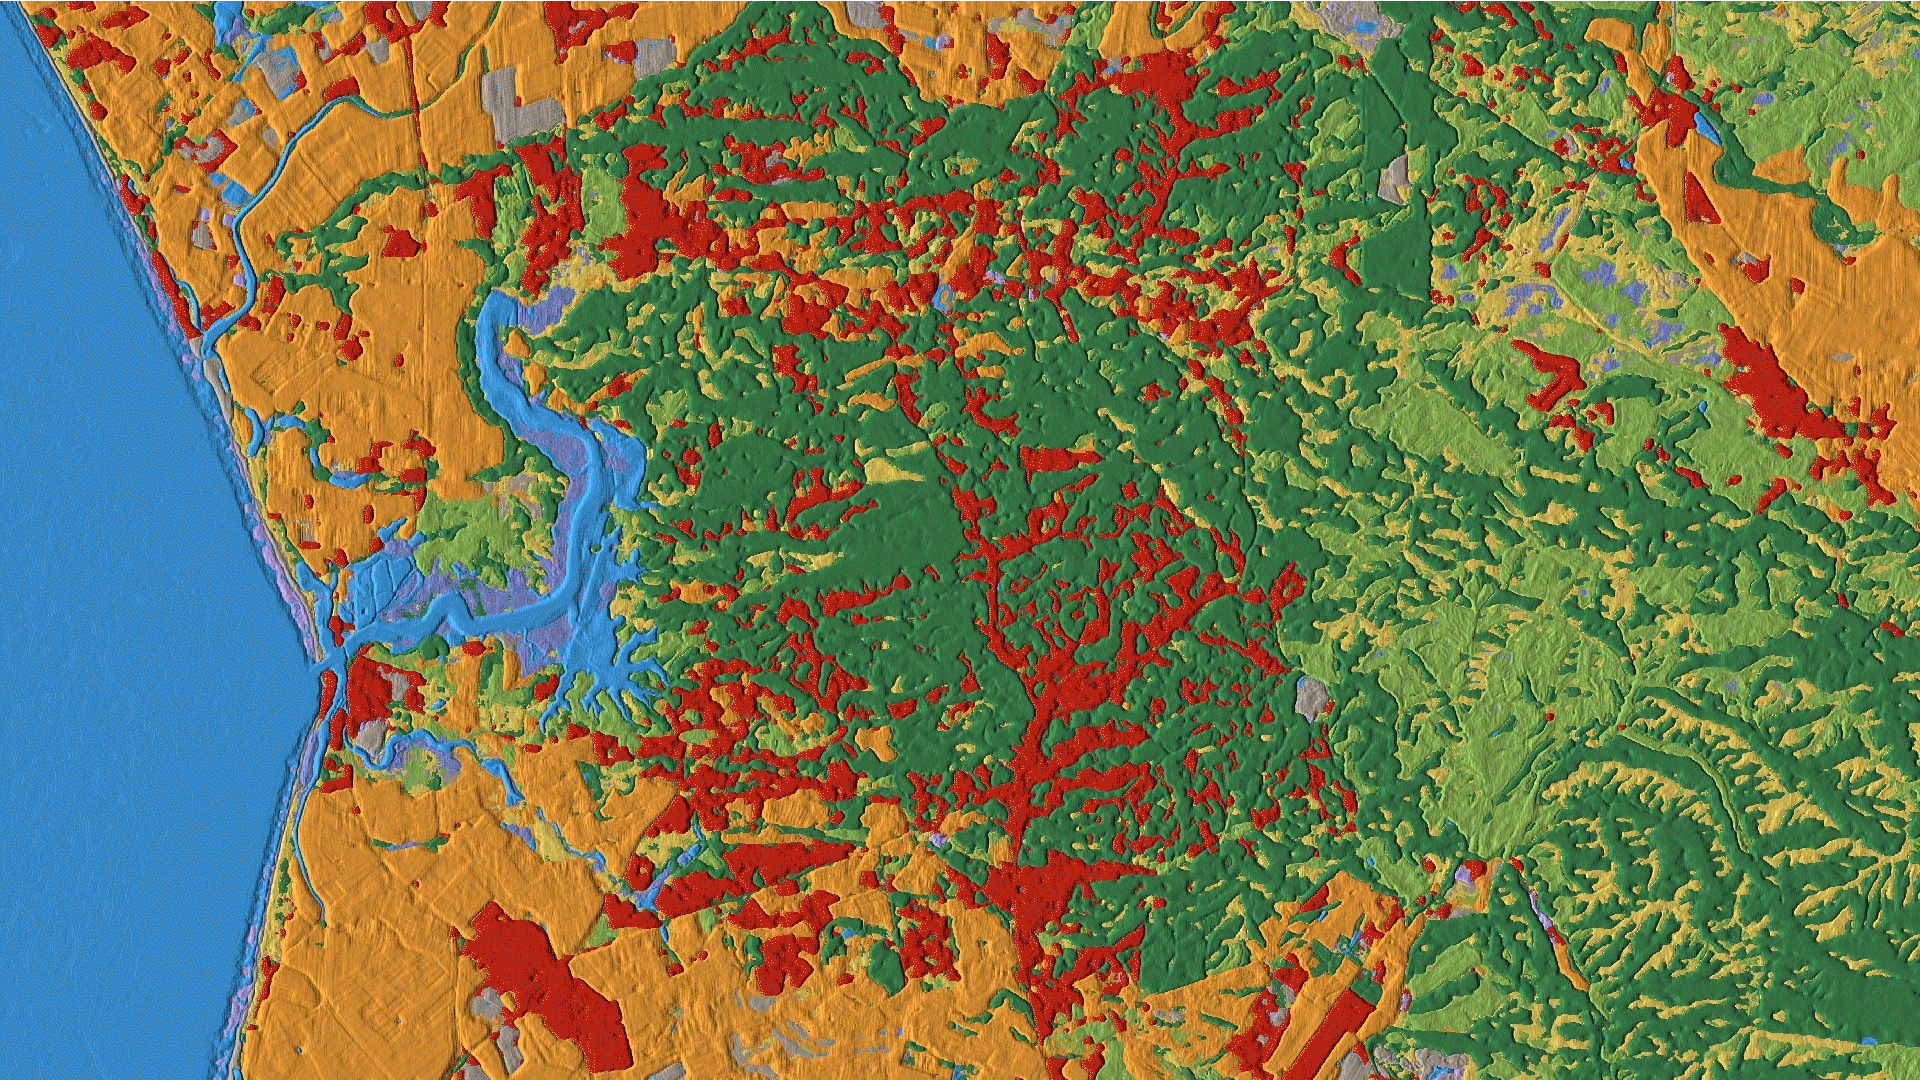 A gif shows land cover imagery from Dynamic World with different types of land cover all over the world indicated by red, orange, yellow, blue, green and purple.